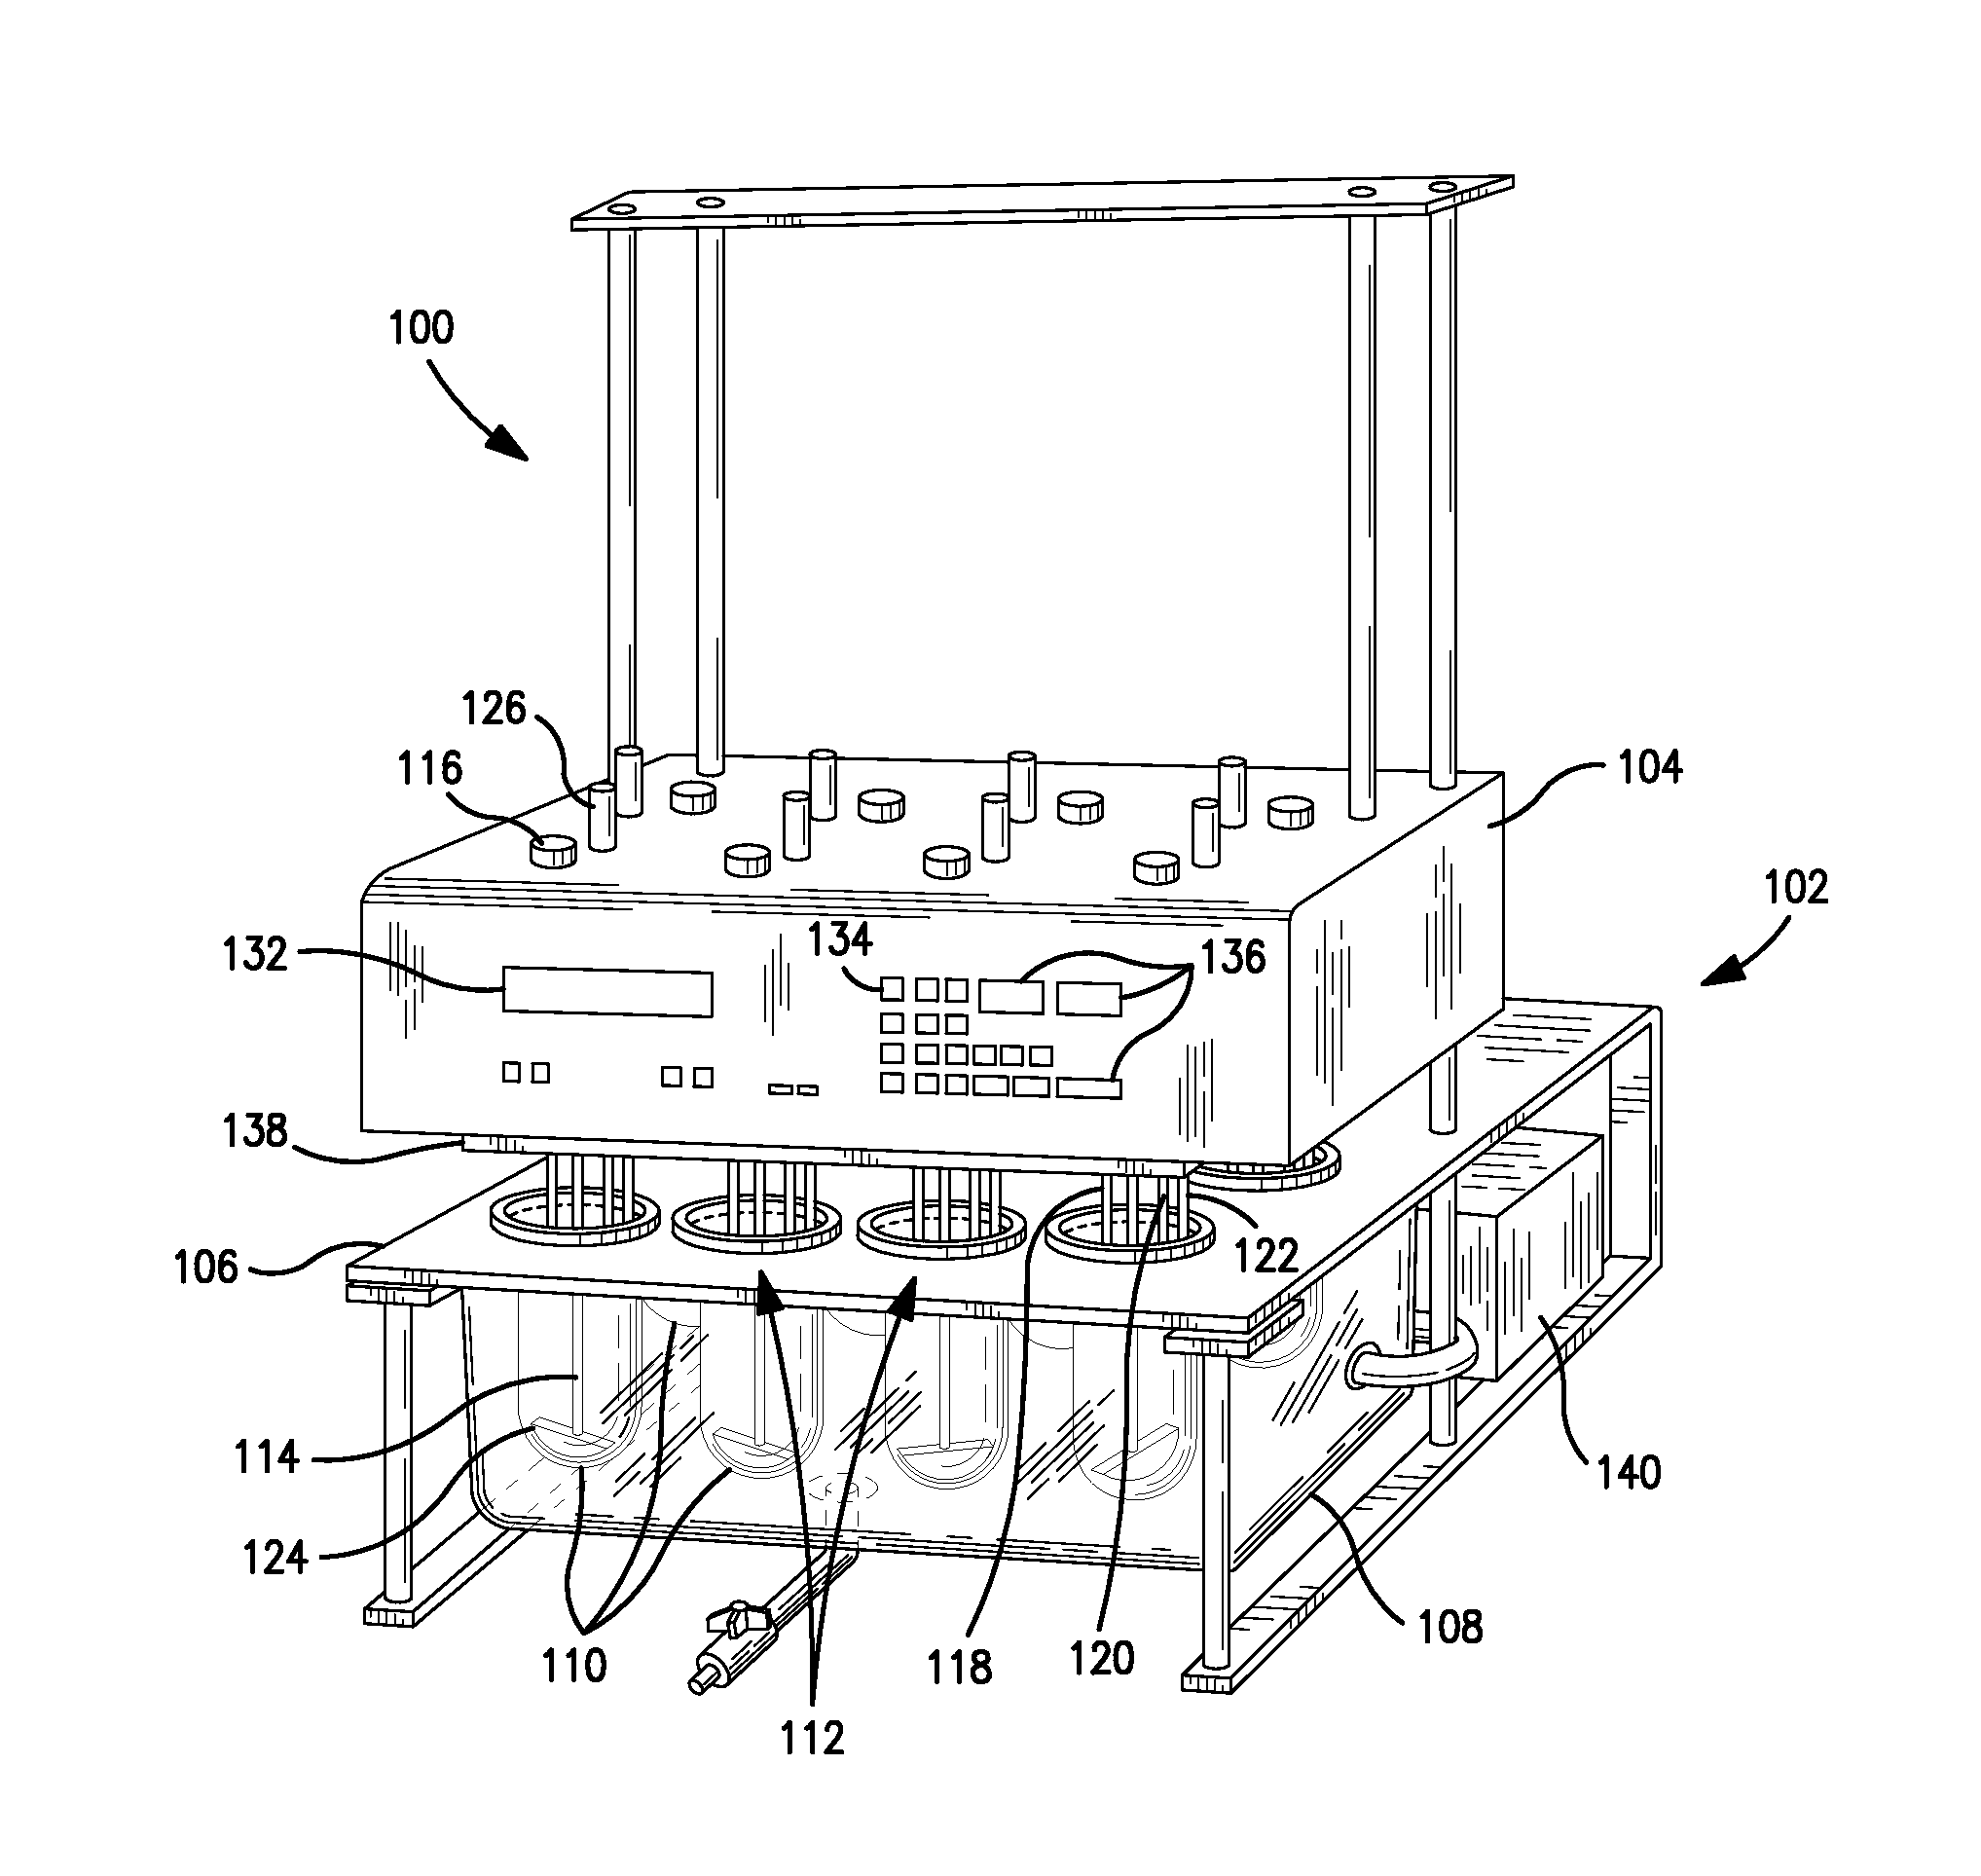 Systems and methods for acquiring and managing sensor data related to dissolution testing apparatus